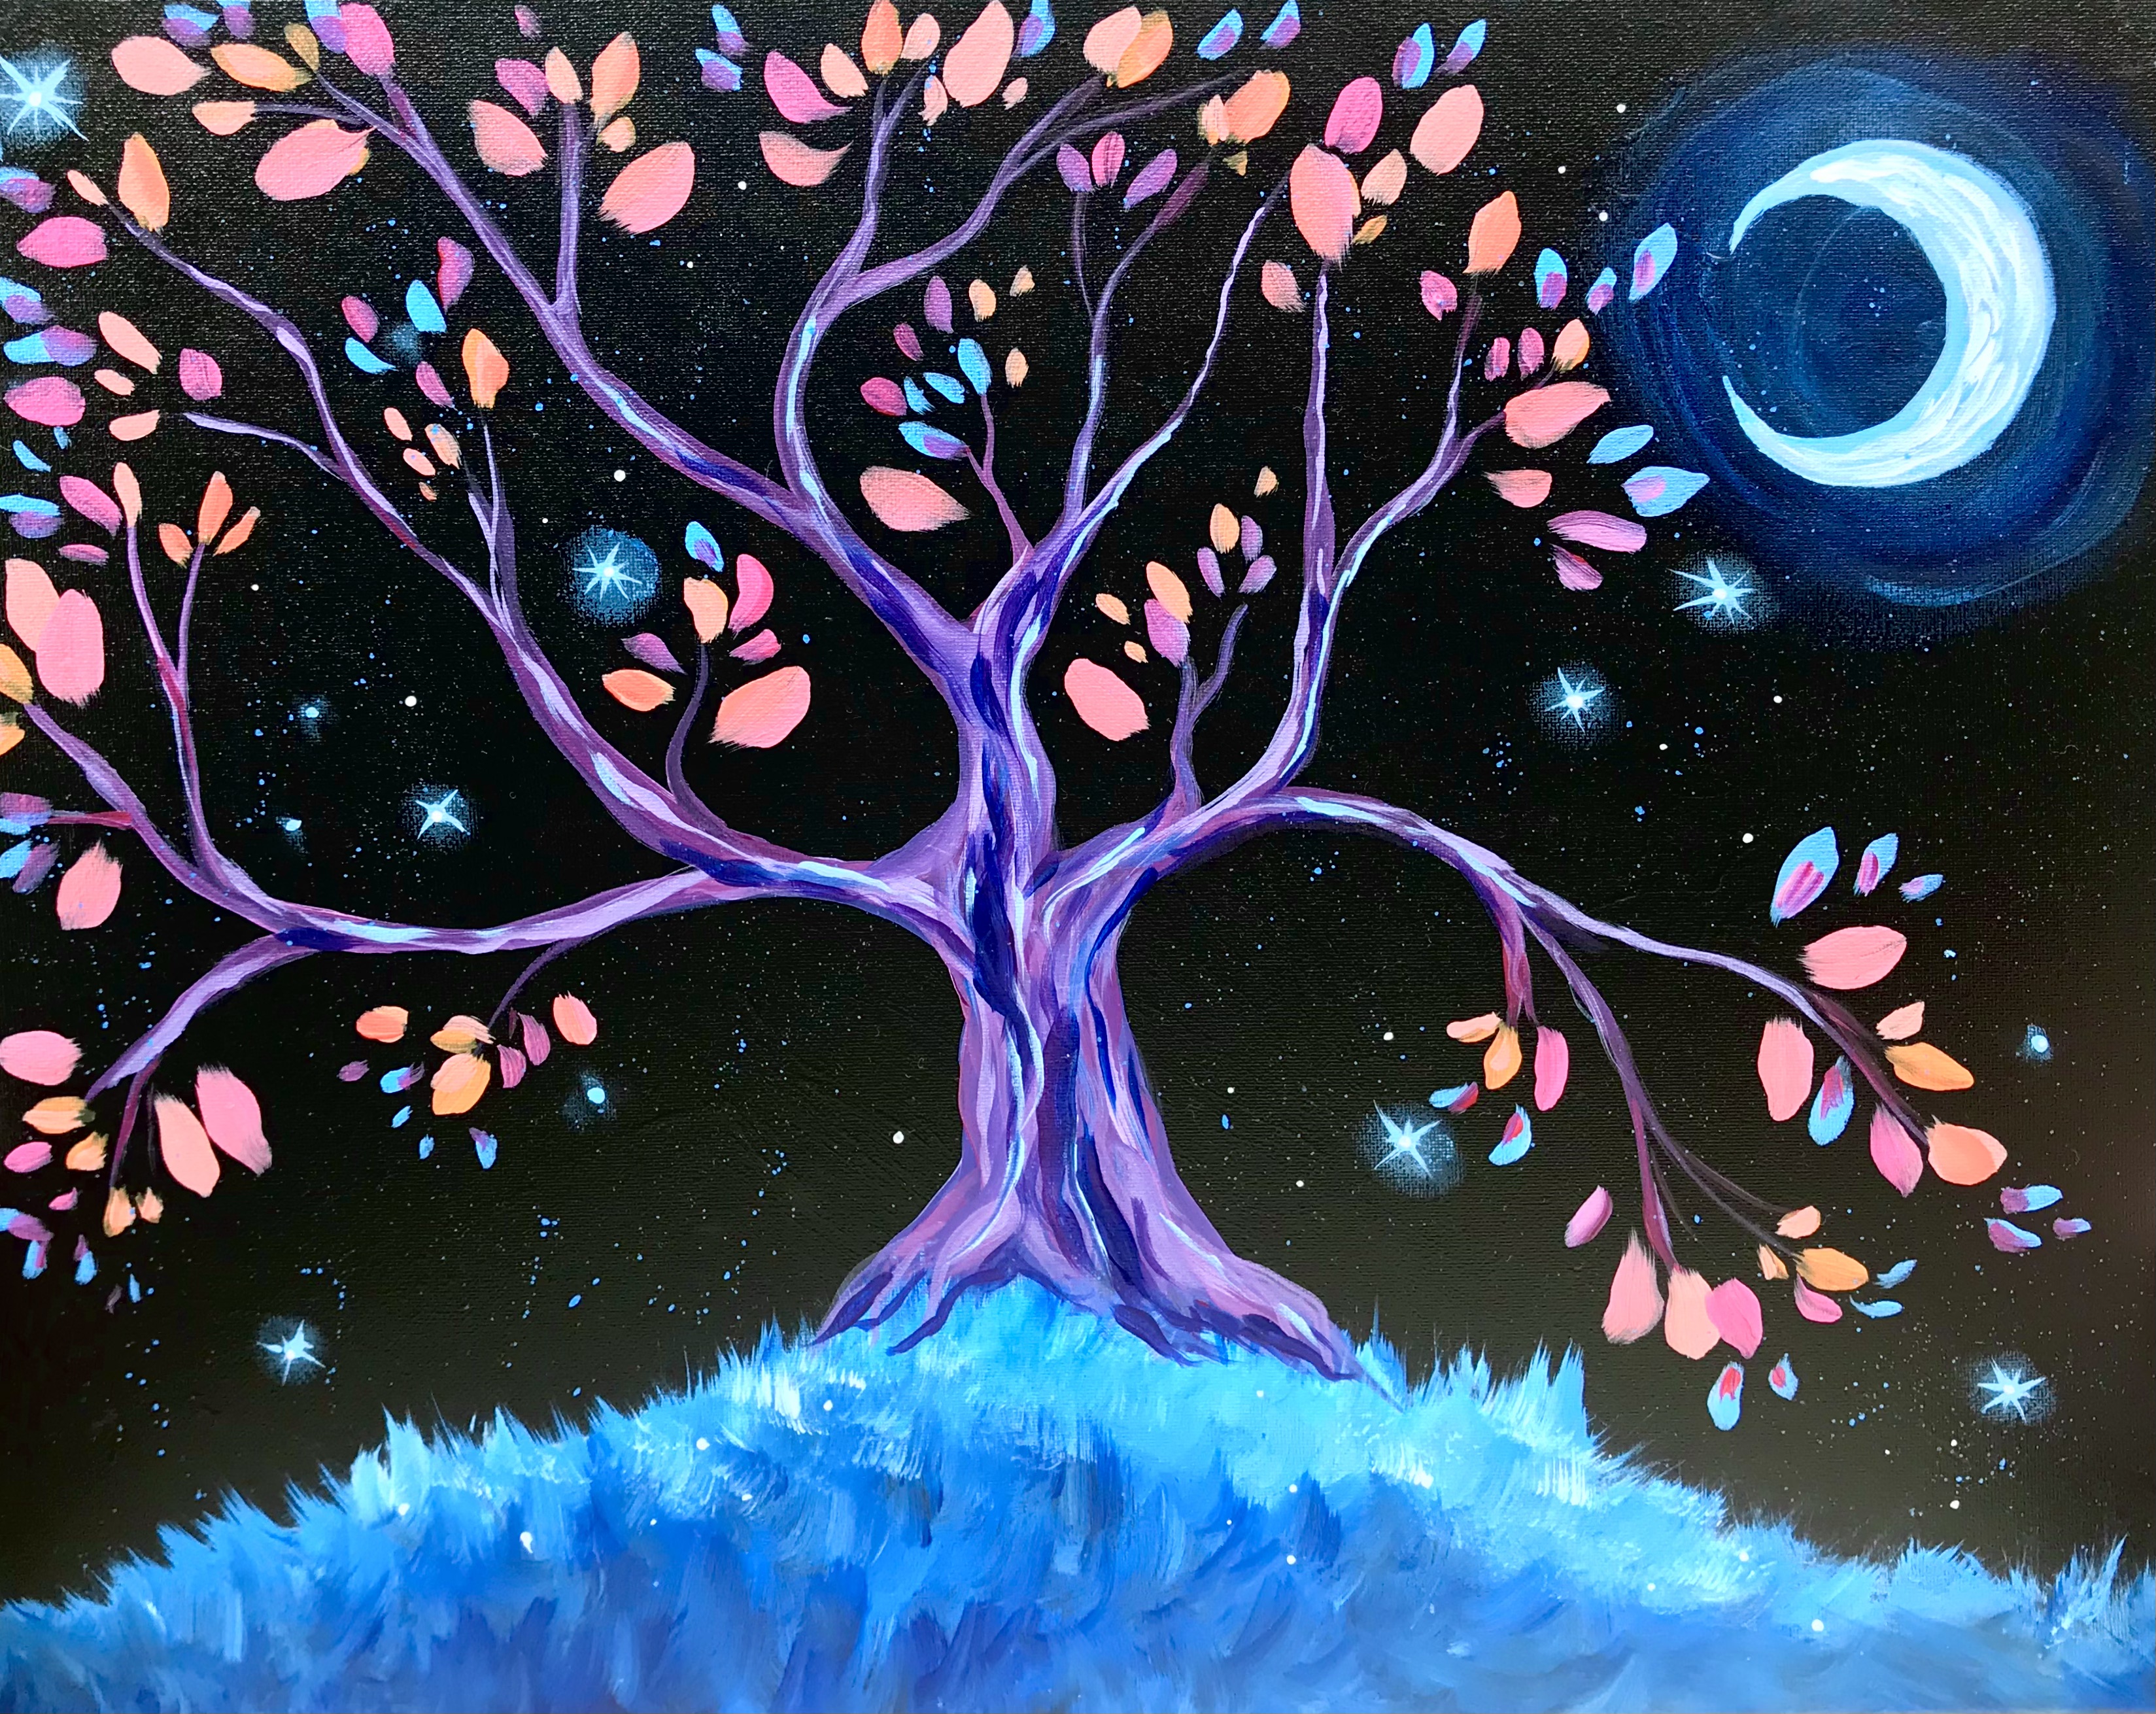 A Midnight Wishing Tree experience project by Yaymaker